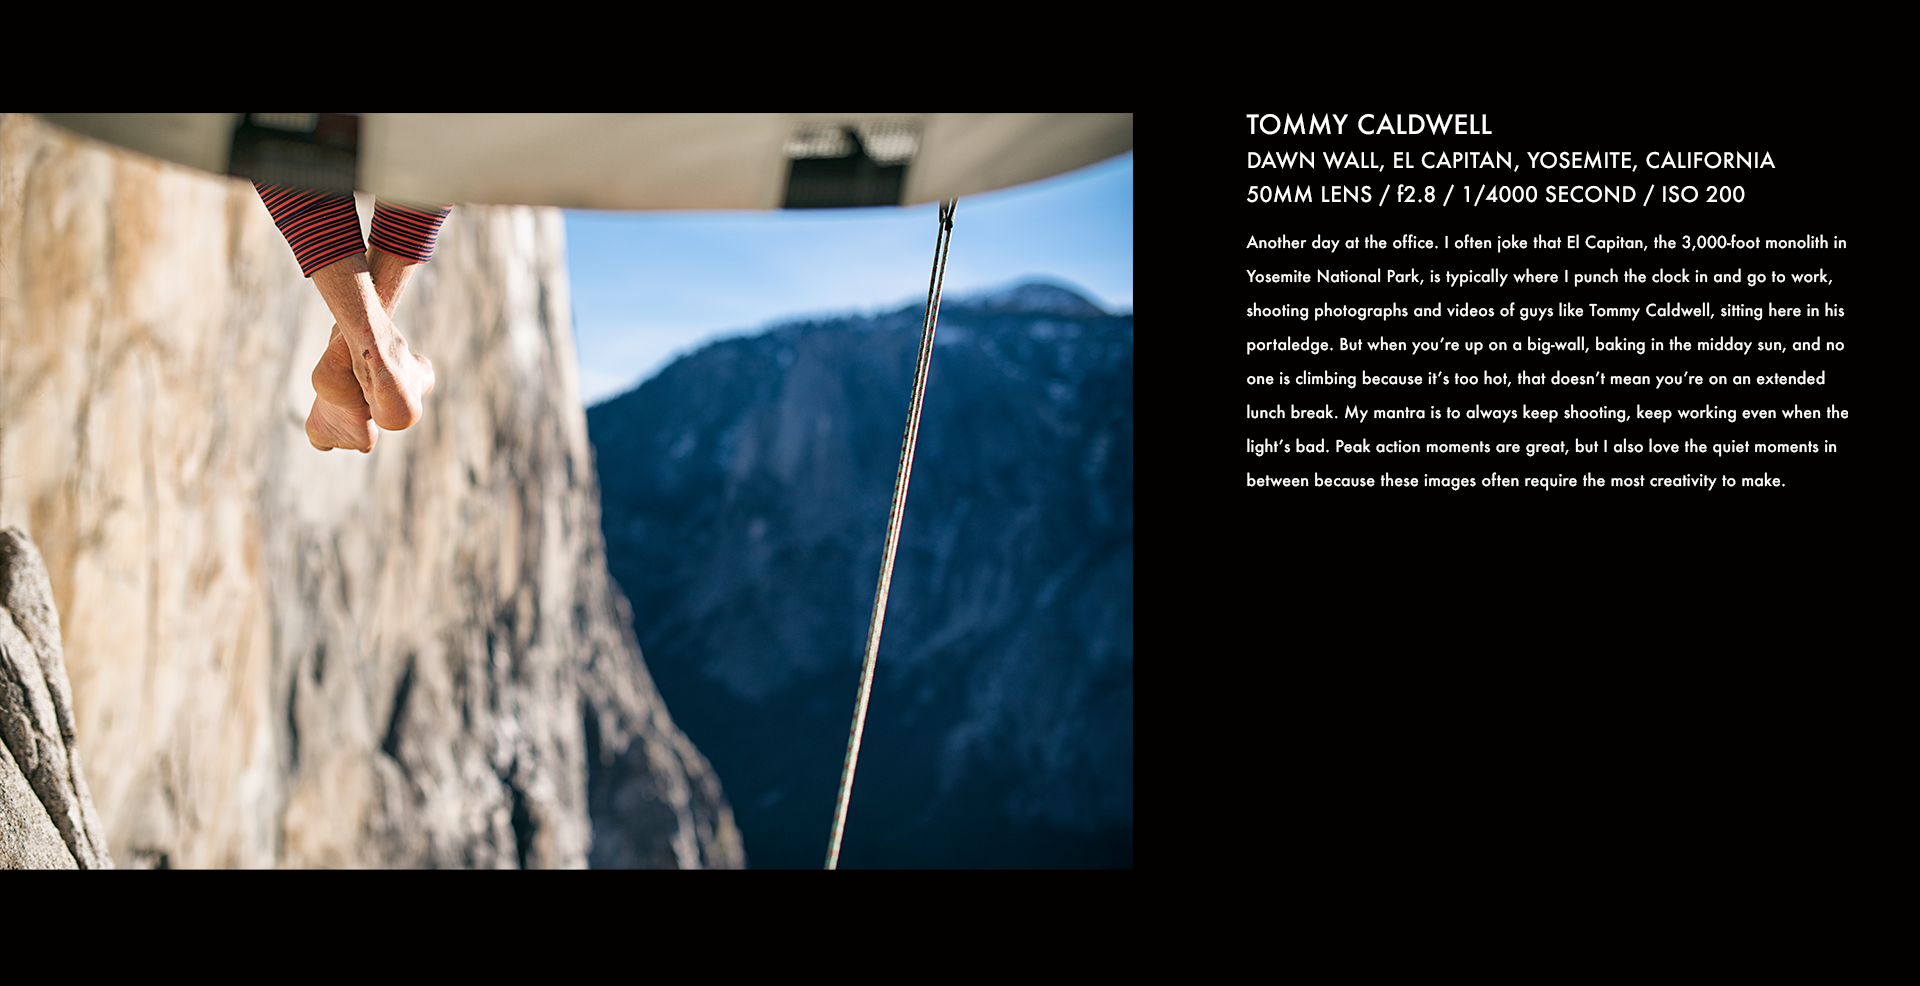  Tommy Caldwell, portaledge, Dawn Wall, Yosemite, climbing, rock climbing, stories behind the images, corey rich 